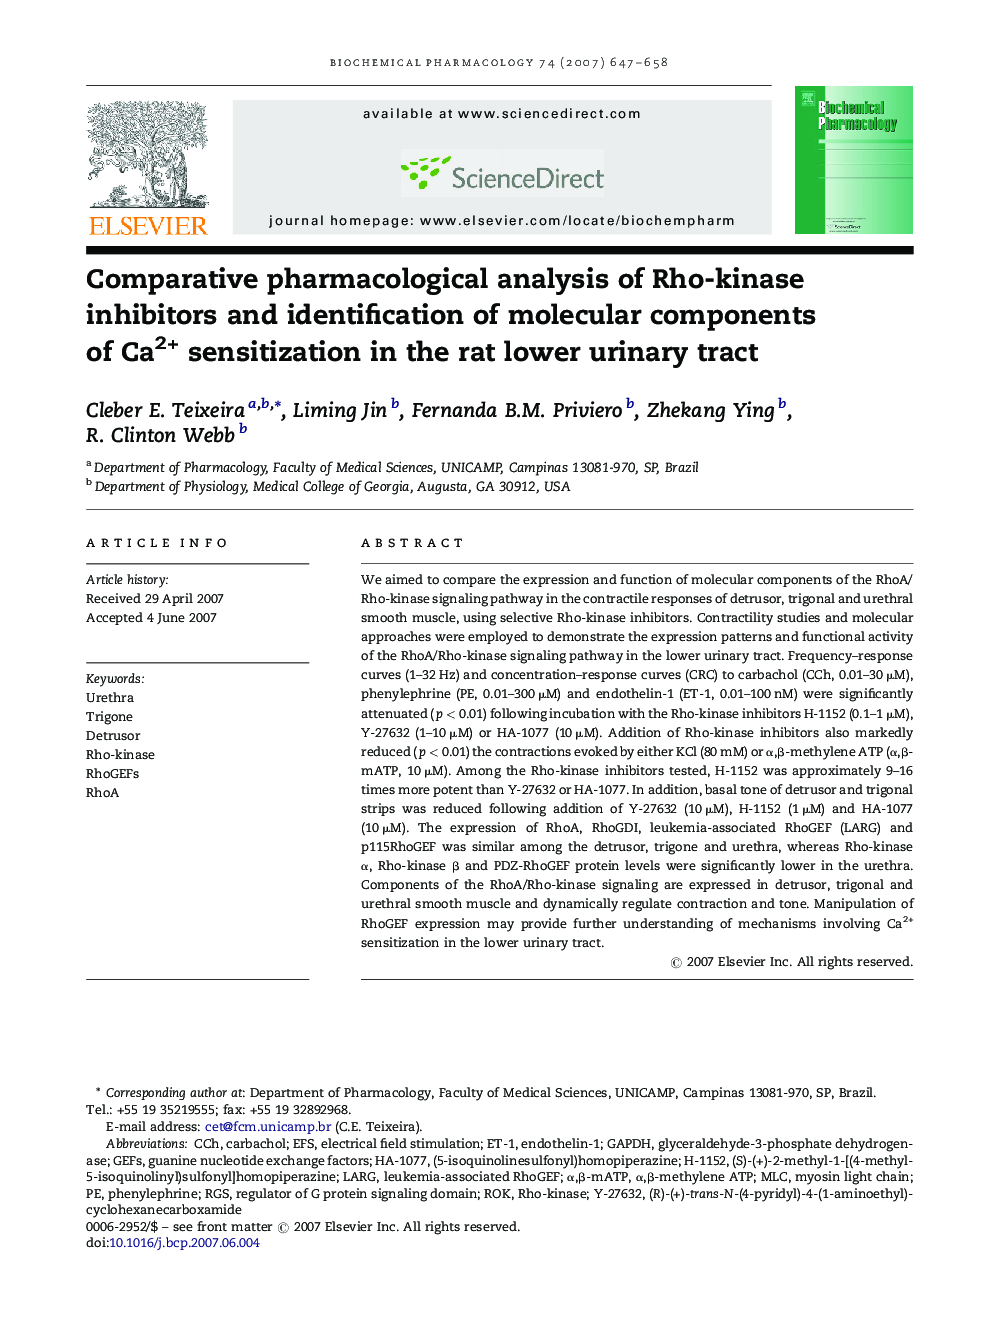 Comparative pharmacological analysis of Rho-kinase inhibitors and identification of molecular components of Ca2+ sensitization in the rat lower urinary tract